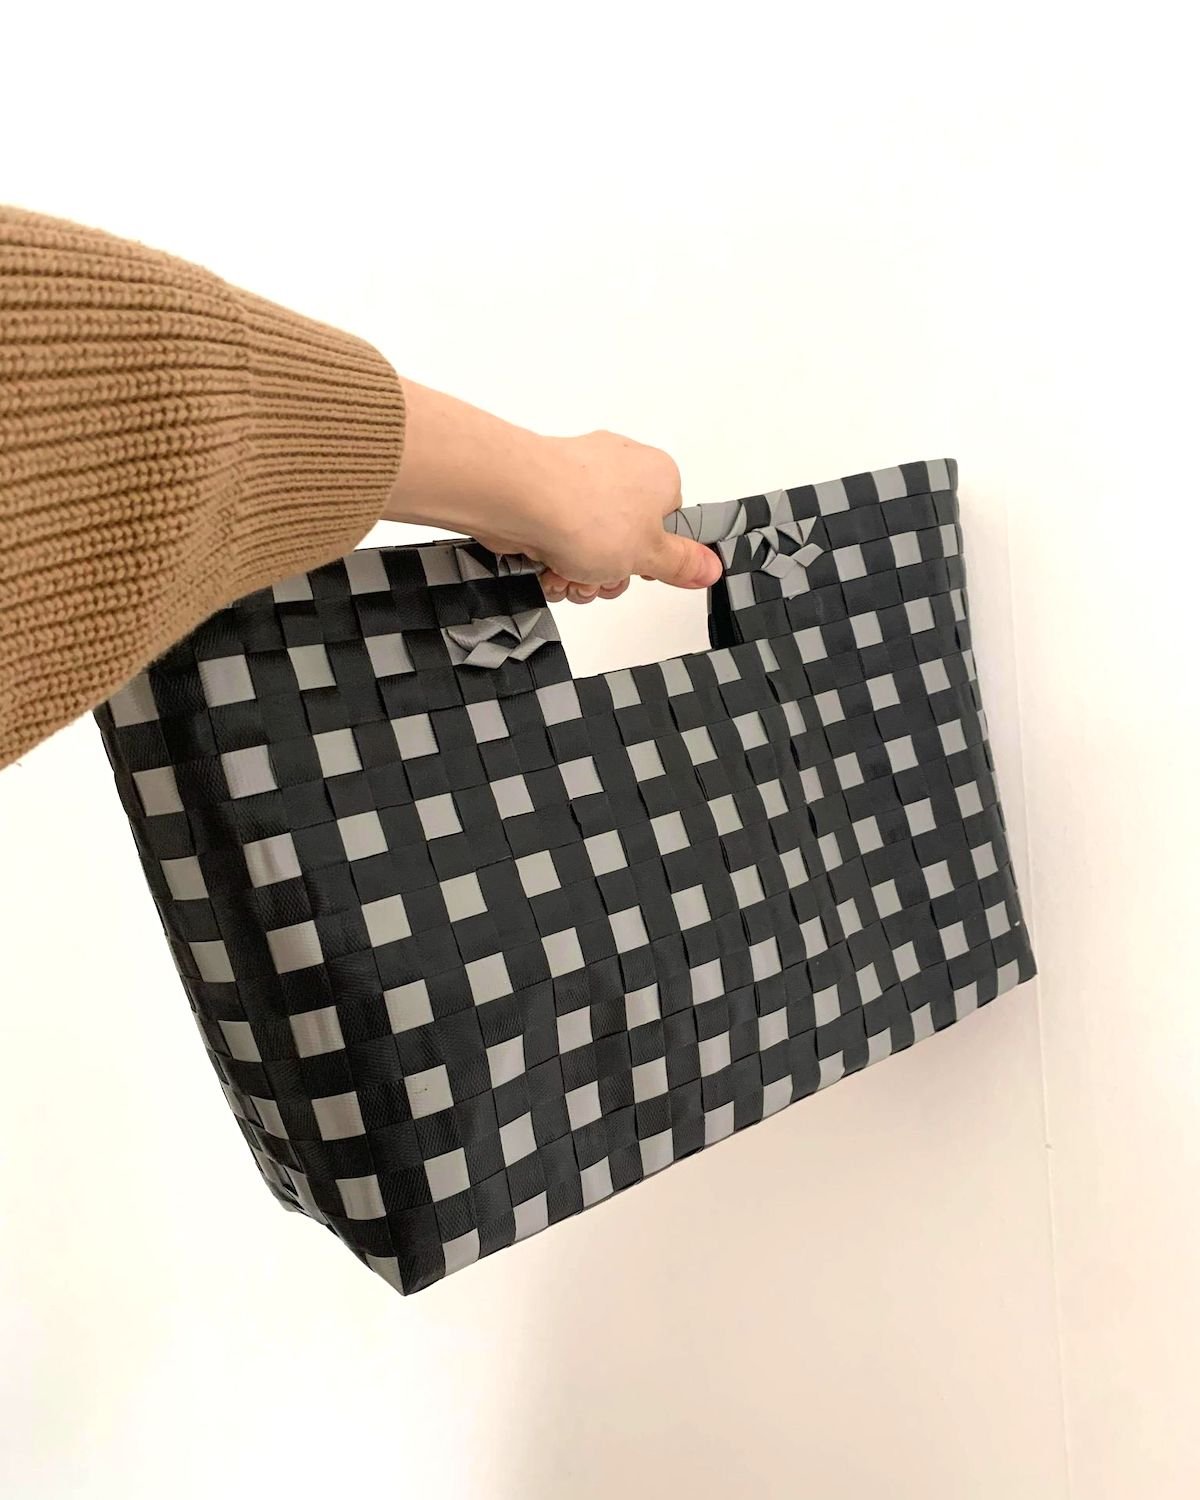 Oversized Upcycled Clutch Bag in Black and Grey, Woven Clutch Bag